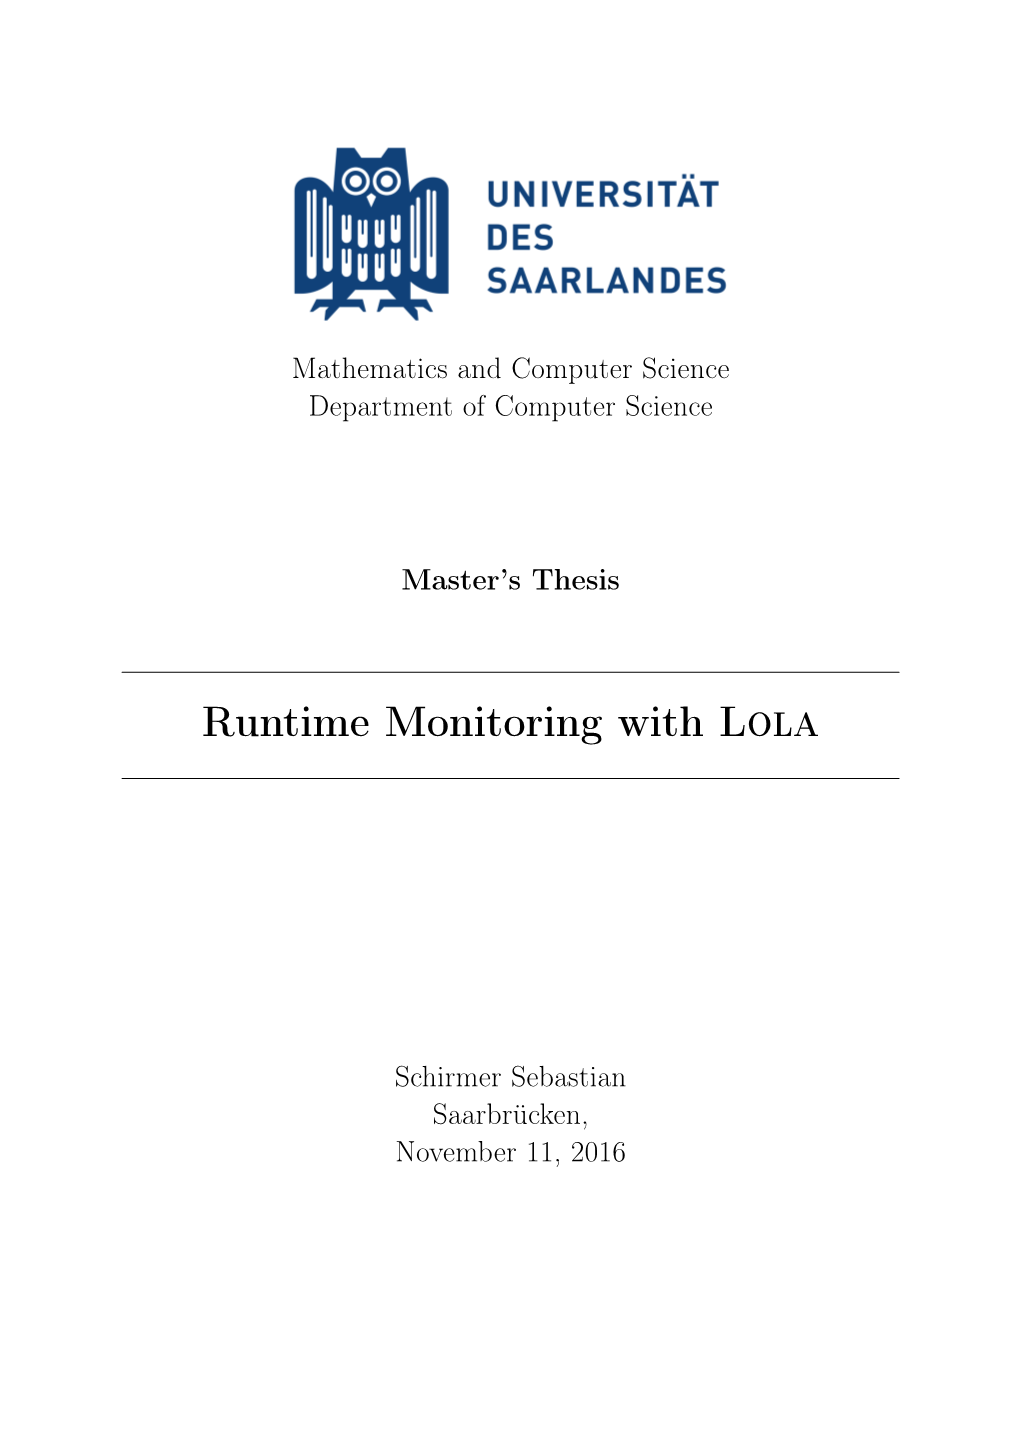 Runtime Monitoring with Lola